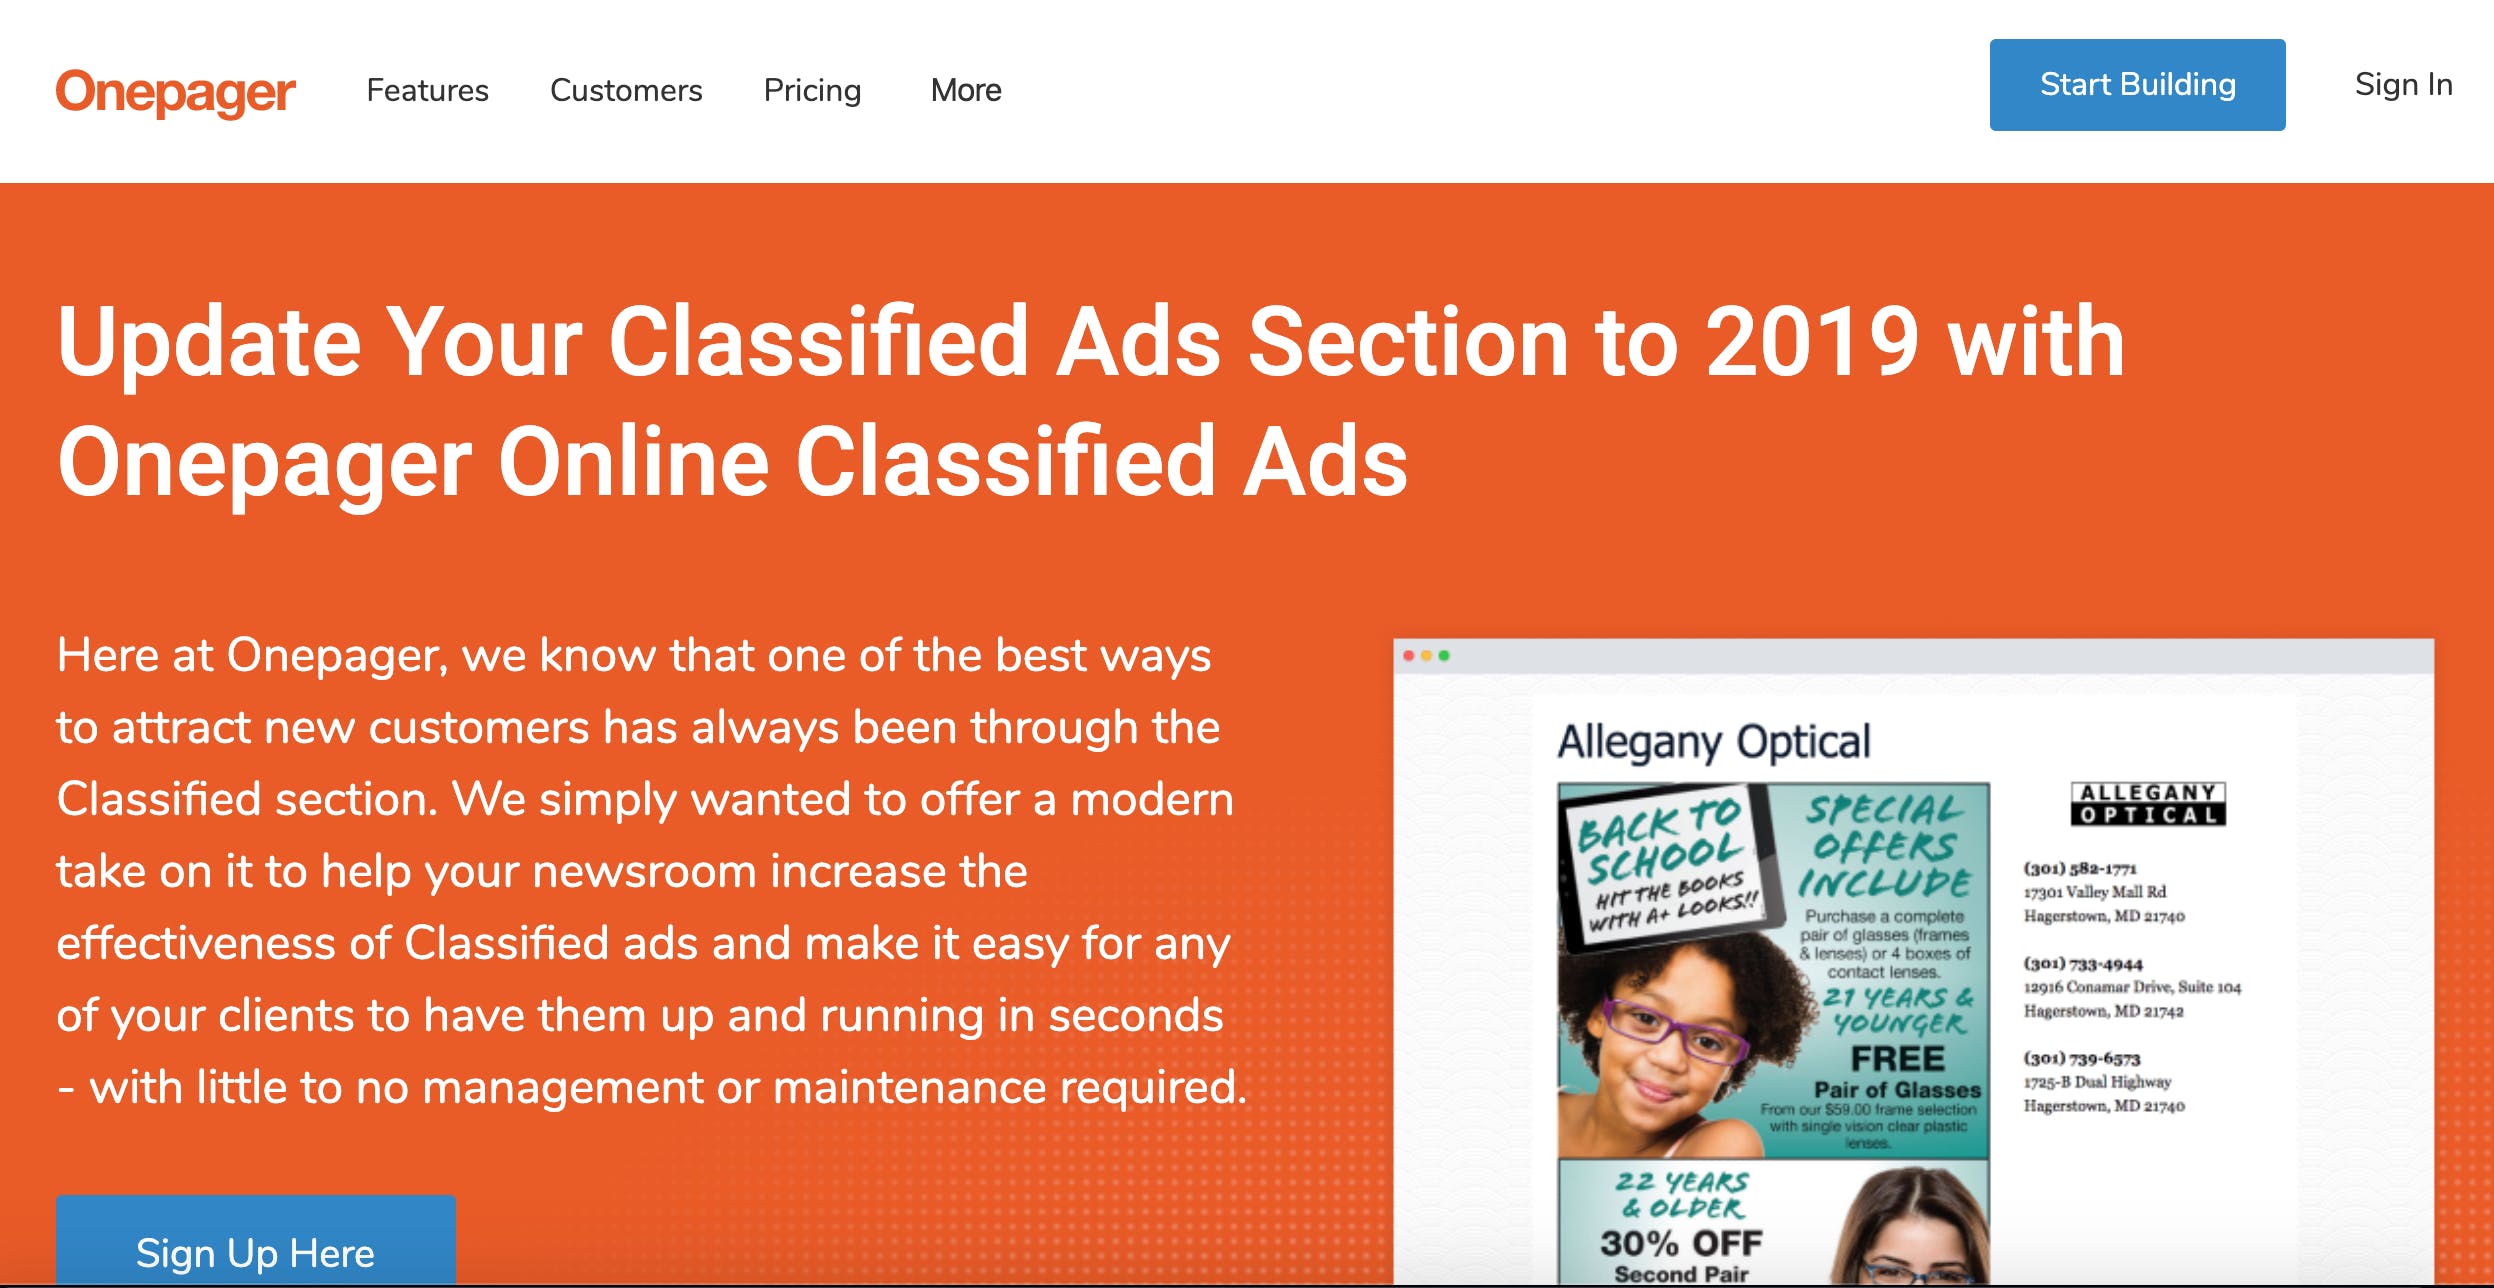 Onepager Online Classified Ads media 1